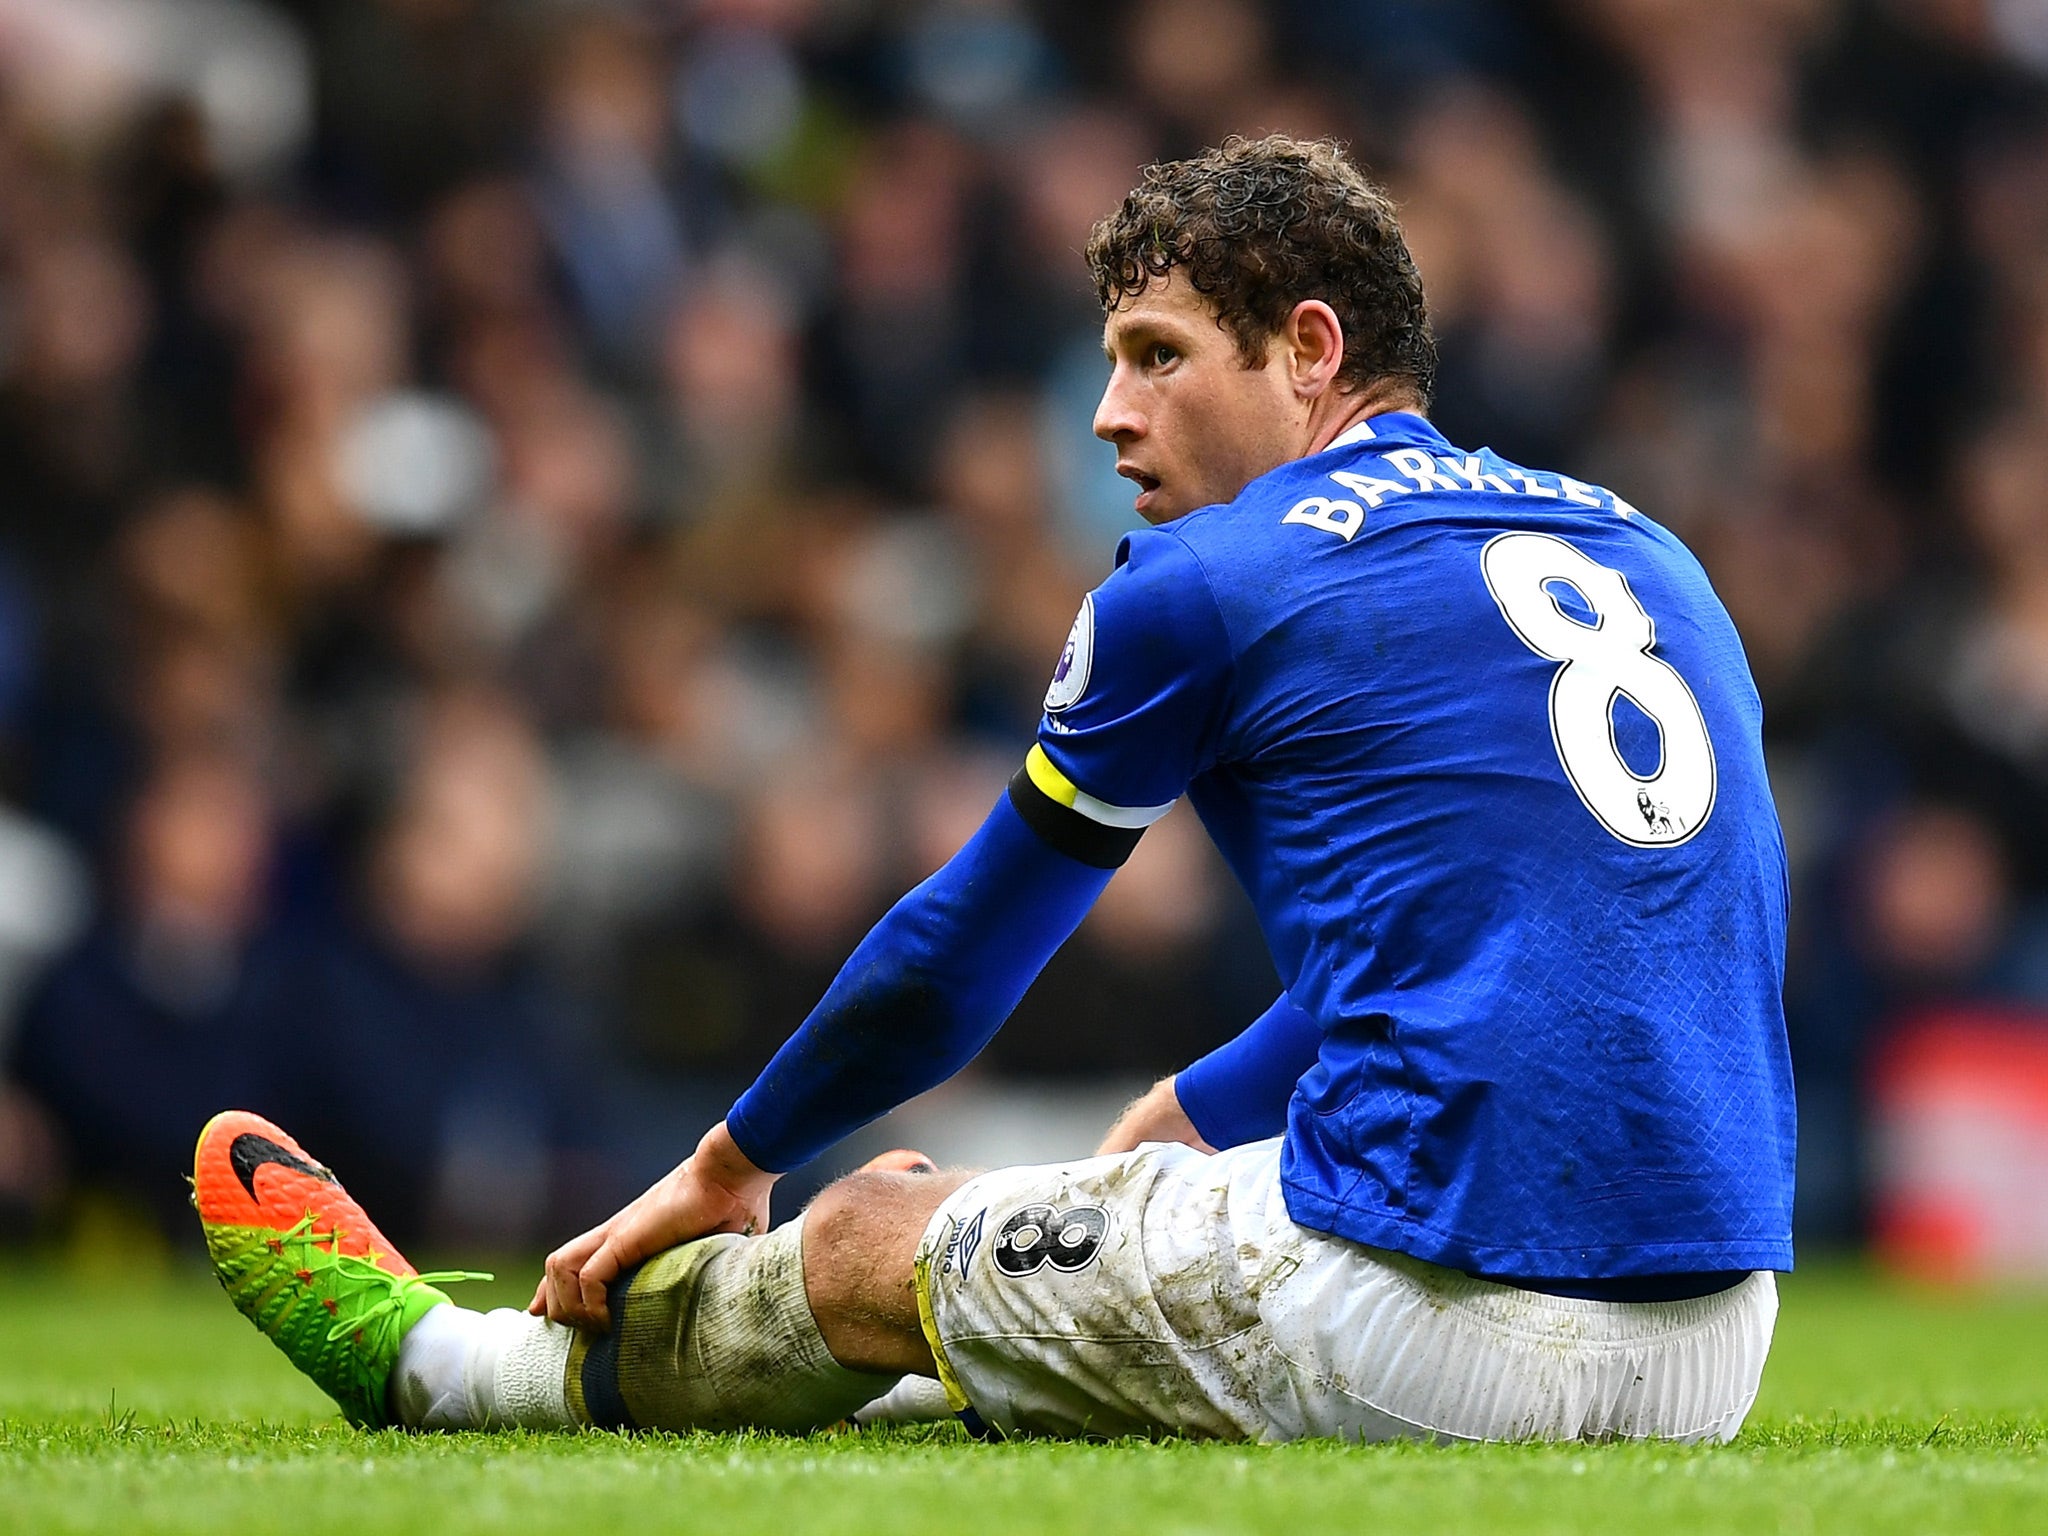 Ross Barkley has been left out of Ronald Koeman's starting line-up on occasion this season